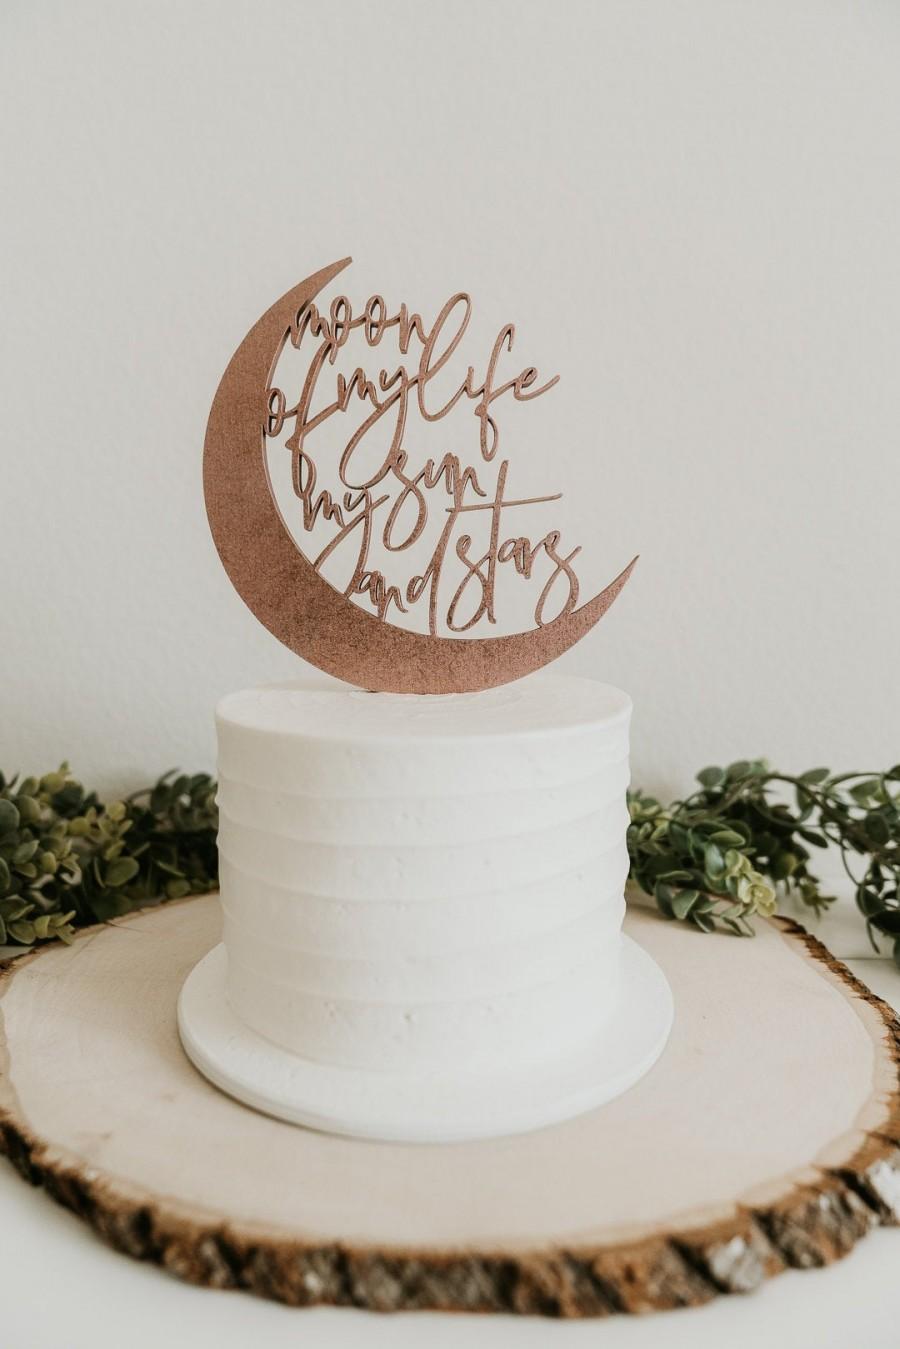 Mariage - moon of my life my sun and stars cake topper, wedding cake topper, baby shower cake topper, moon cake topper, moon party decor